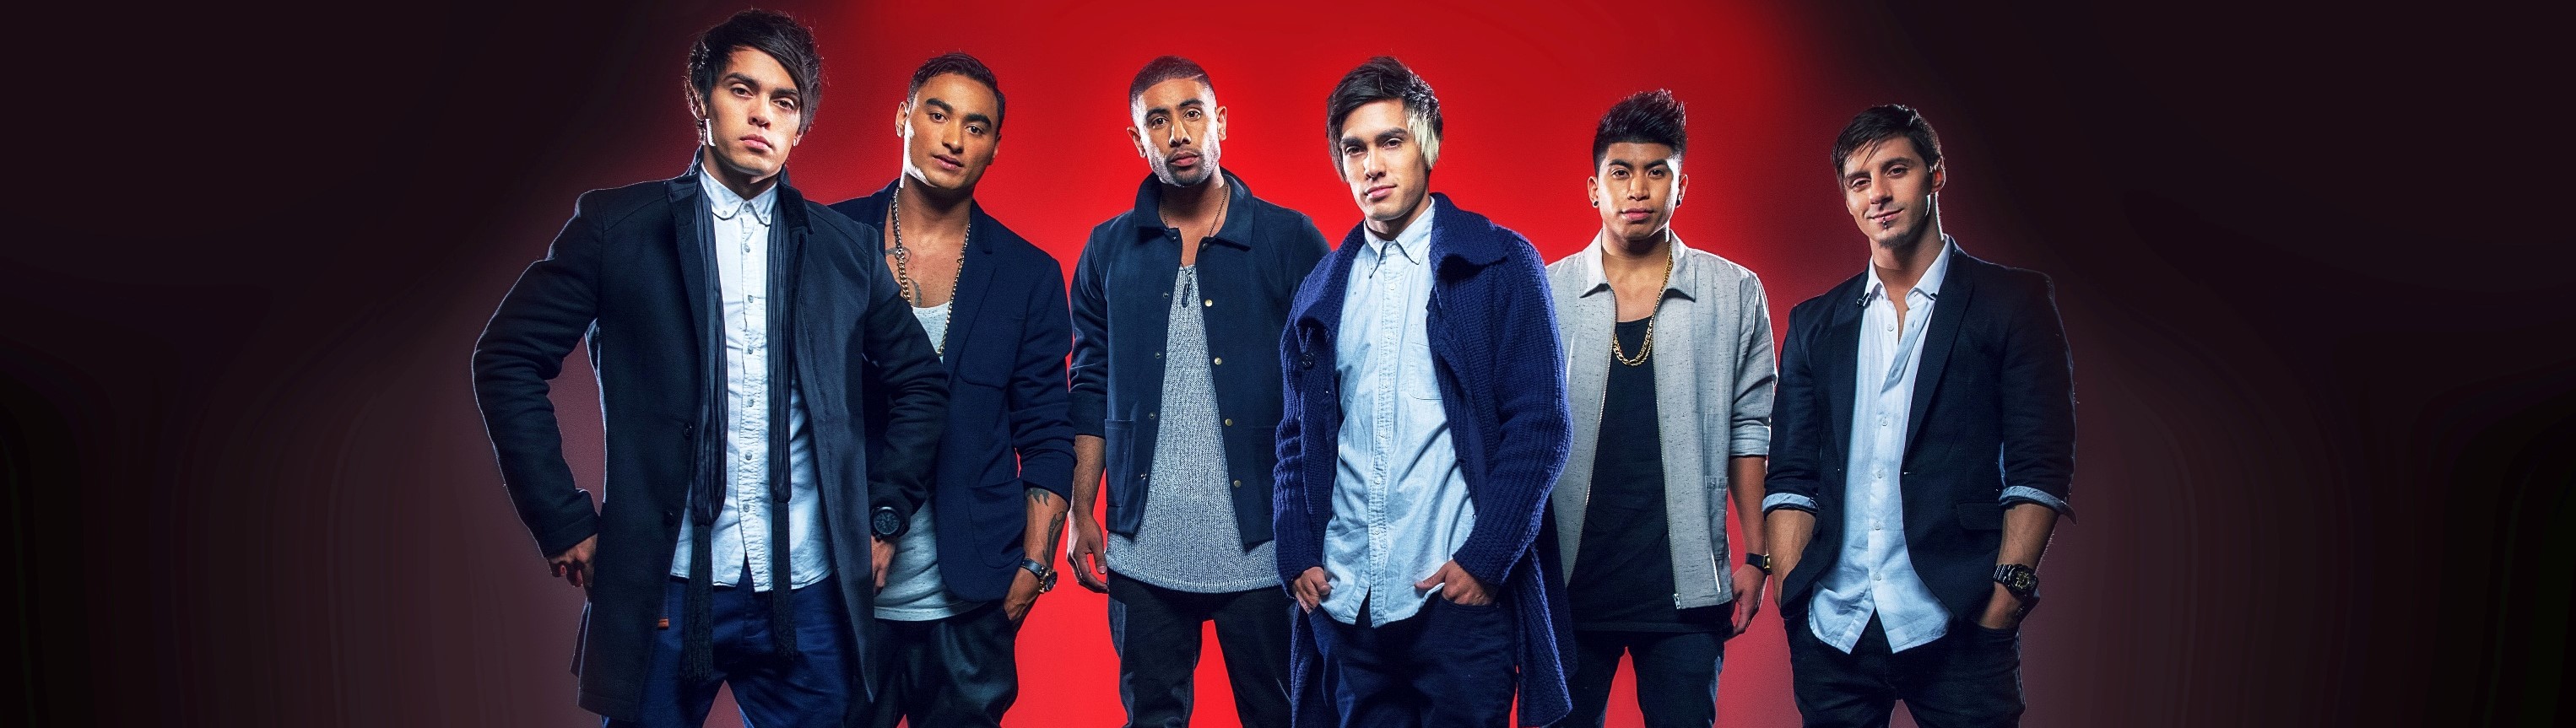 Justice Crew Announce New Album ‘Live By The Words’ On Sale November!